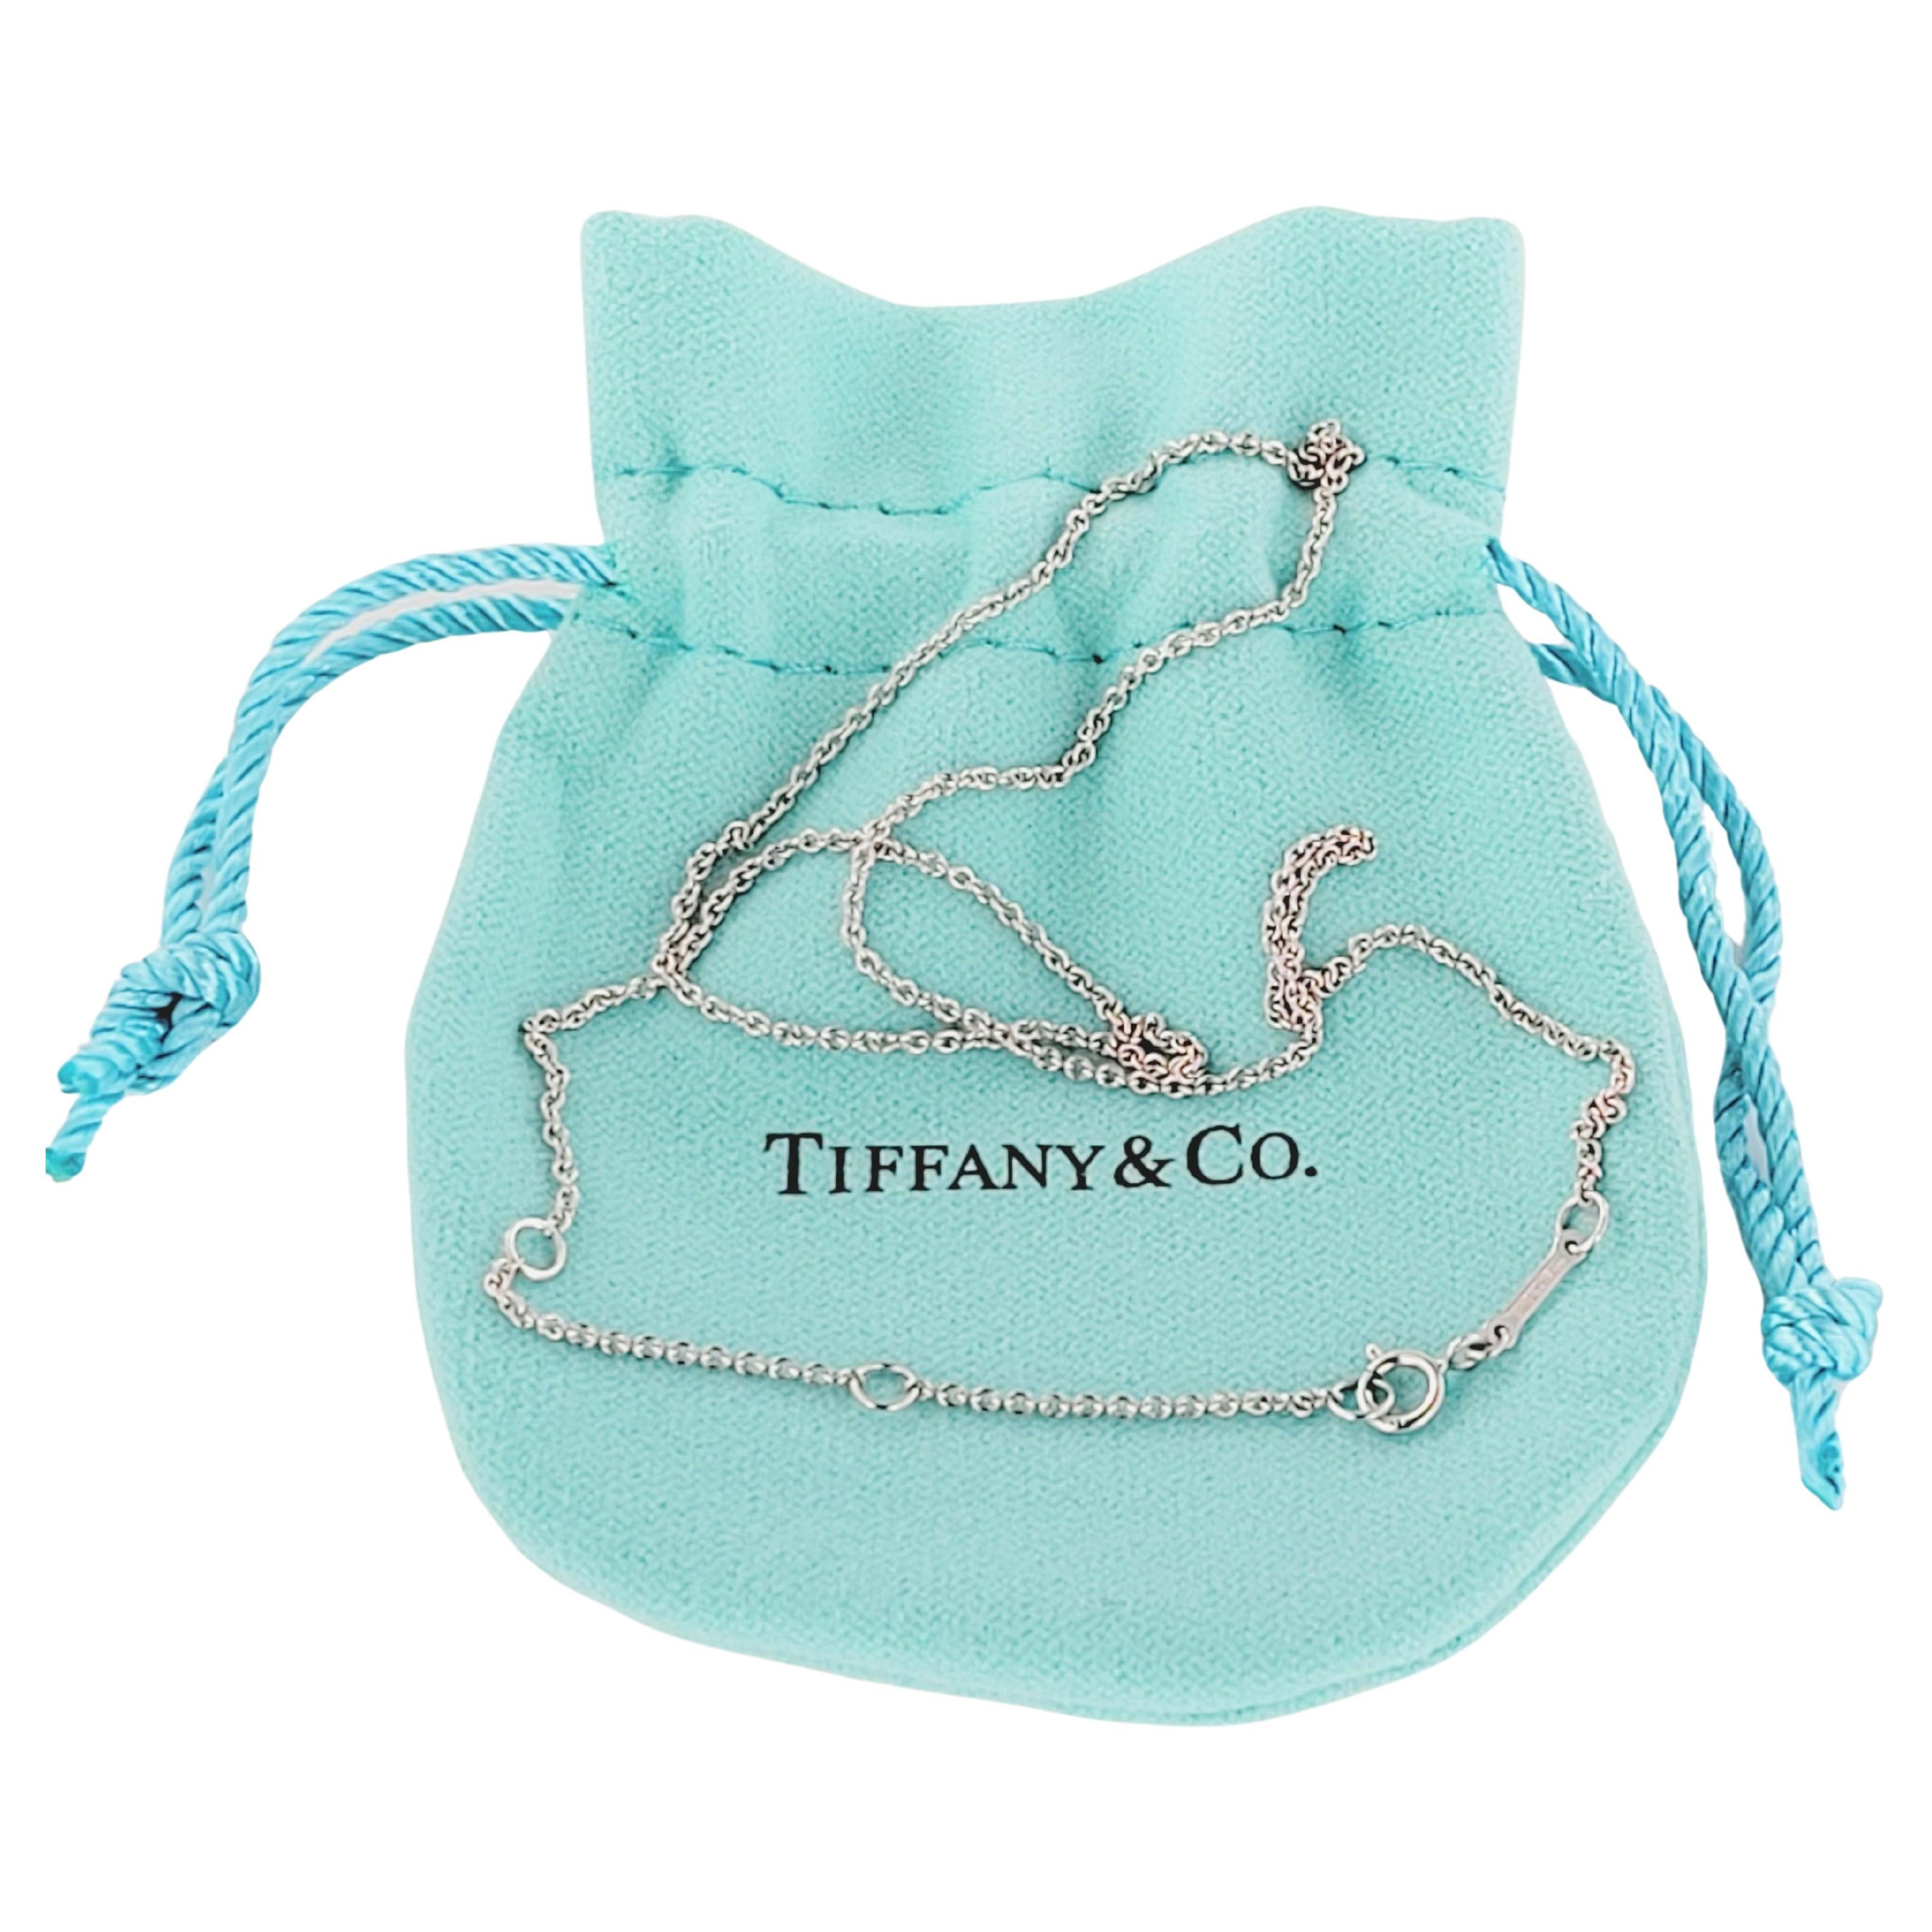 Tiffany & co Paloma Picasso Adjustable chain PT950  16'' Long